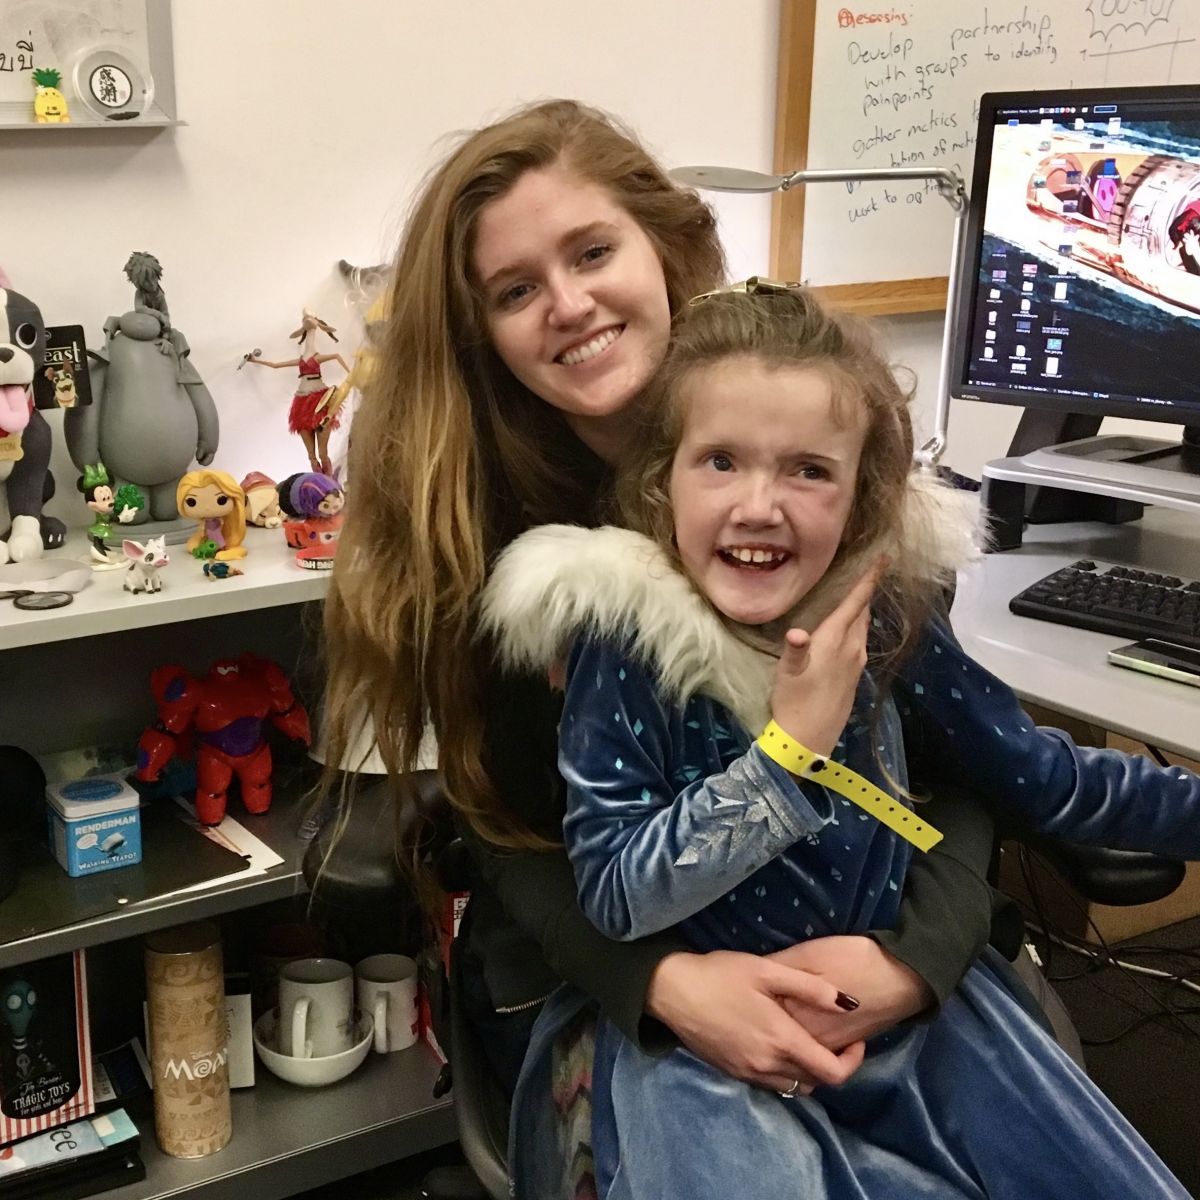 Kraemer's sister visiting her at work, dressed as Elsa from the "Frozen" franchise. (Photo provided)